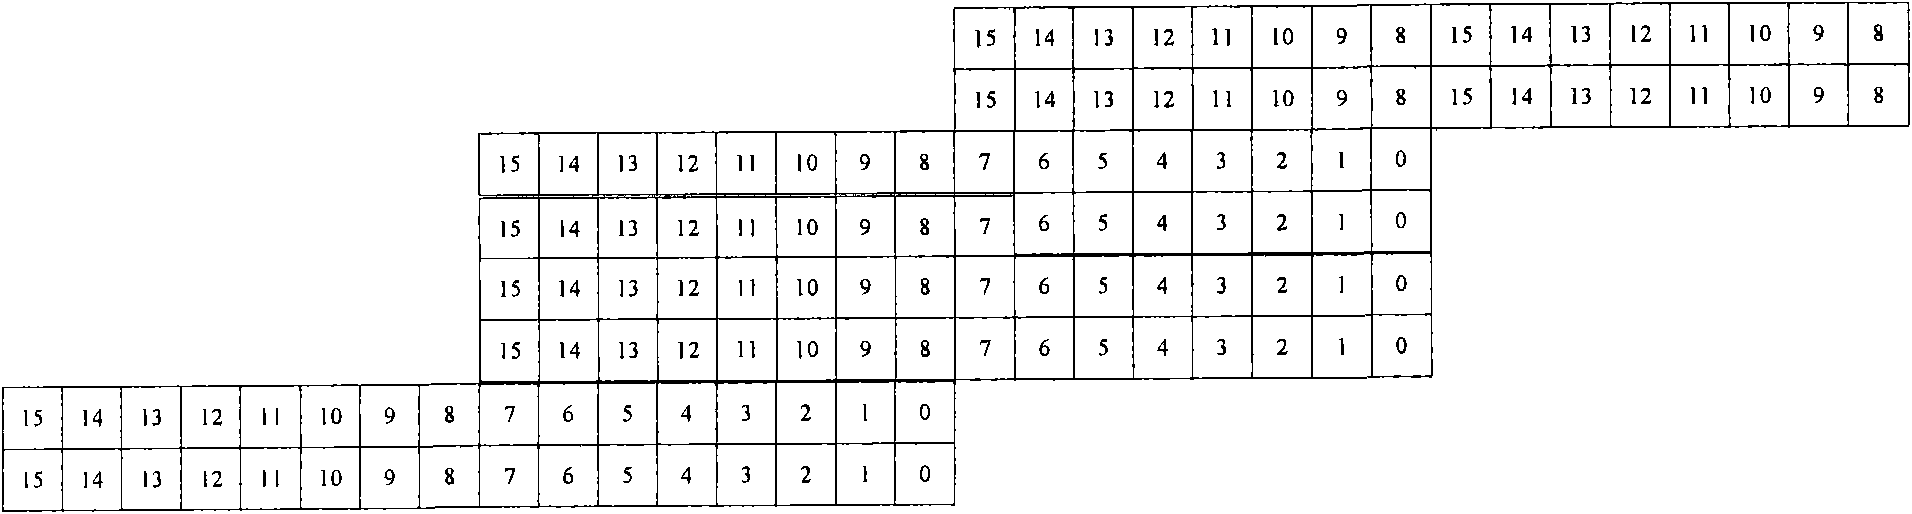 64-bit fixed and floating point multiplier unit supporting complex operation and subword parallelism